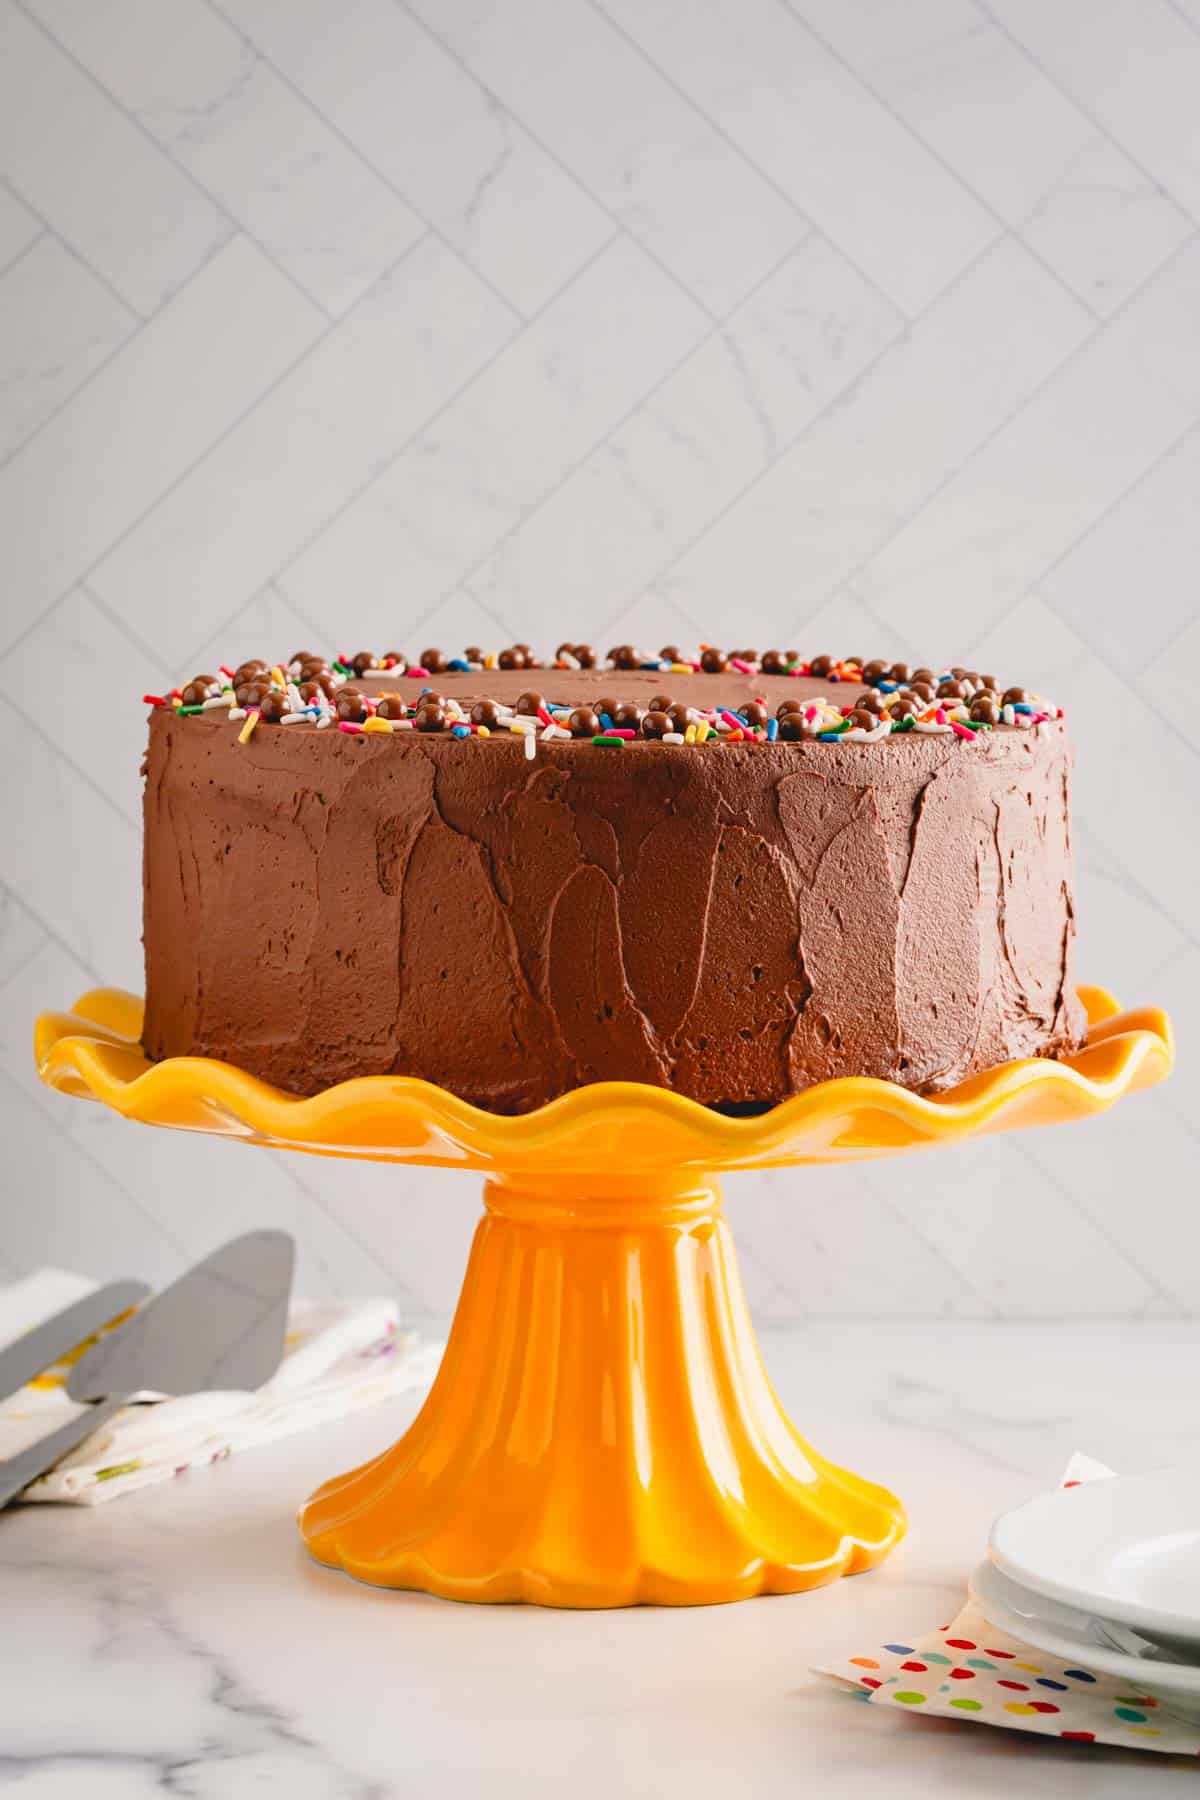 A classic yellow cake with chocolate frosting on a yellow cake stand.